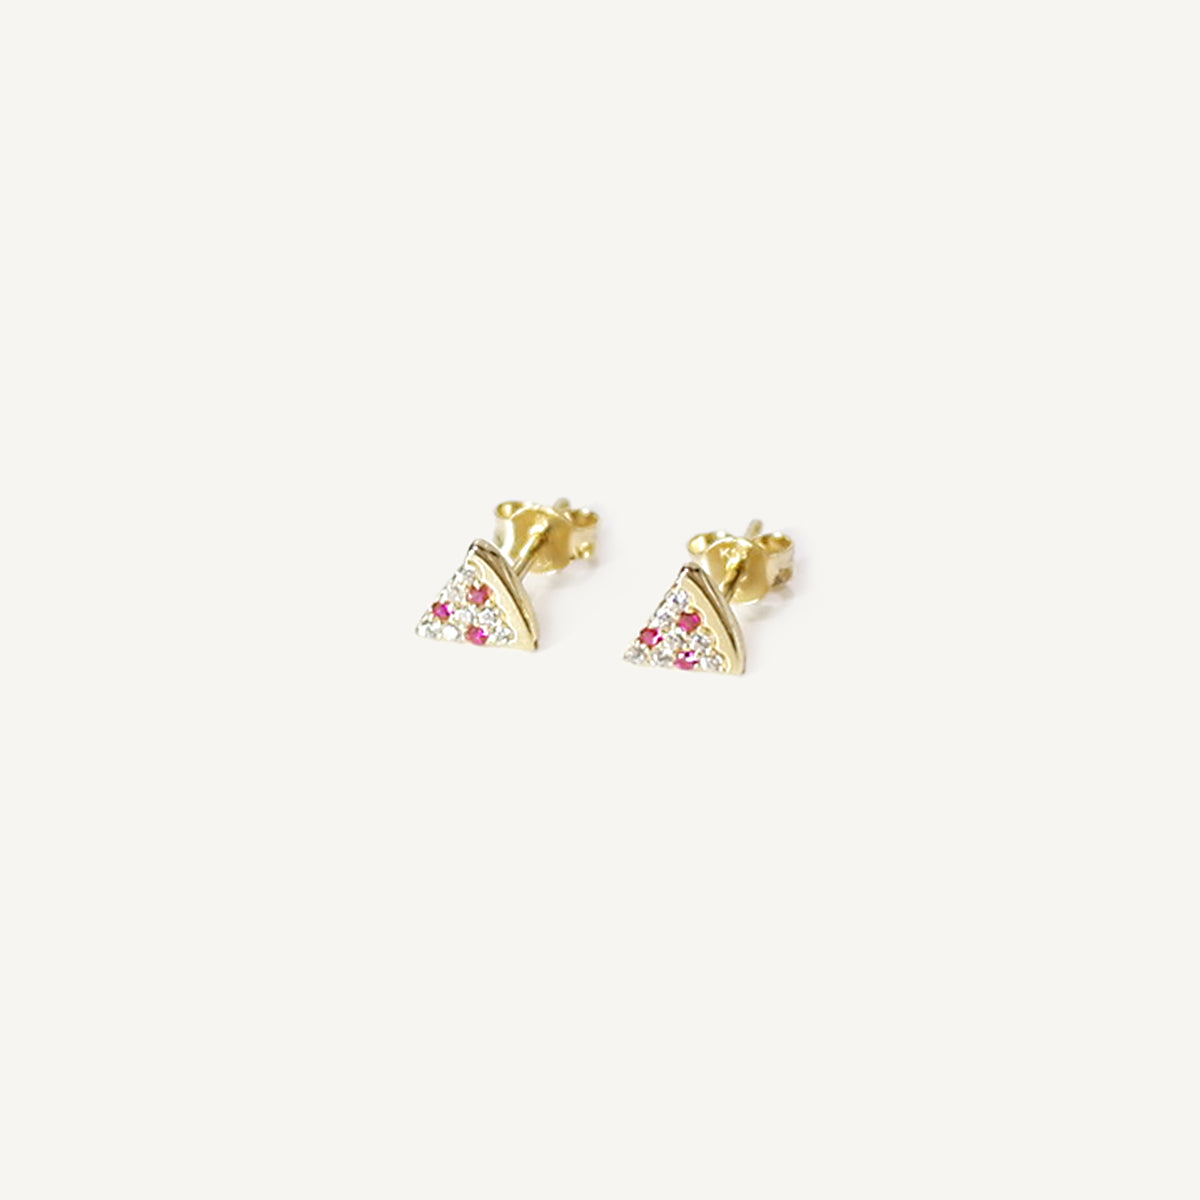 The Pizza Earrings in Solid Gold